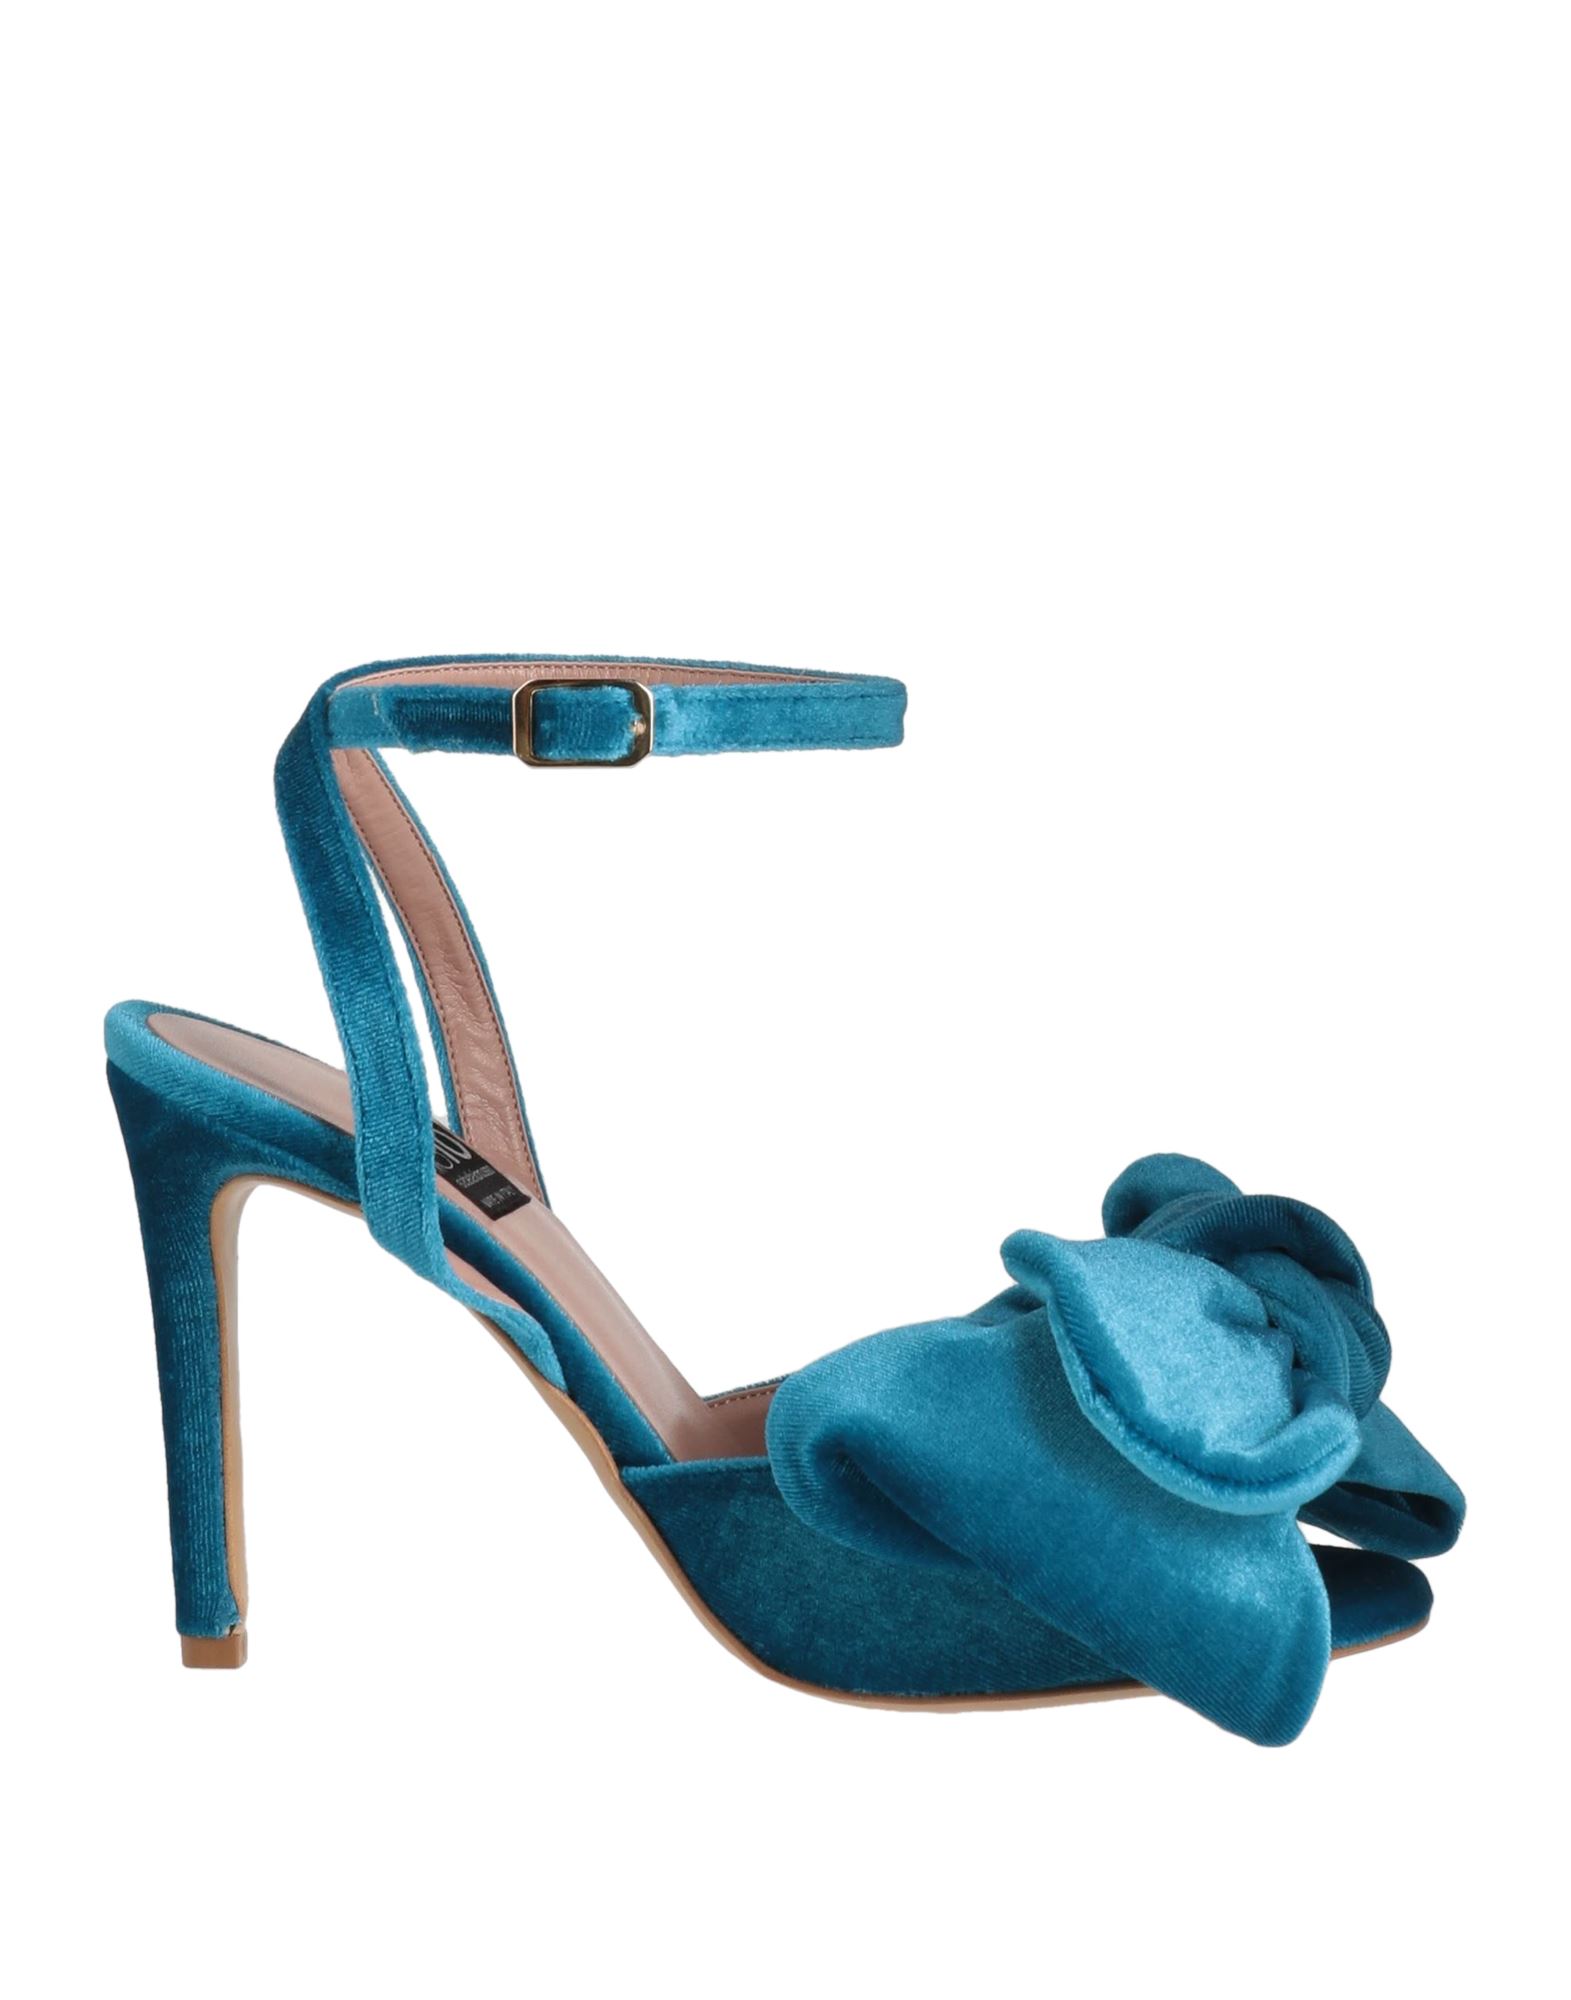 Islo Isabella Lorusso Sandals In Blue